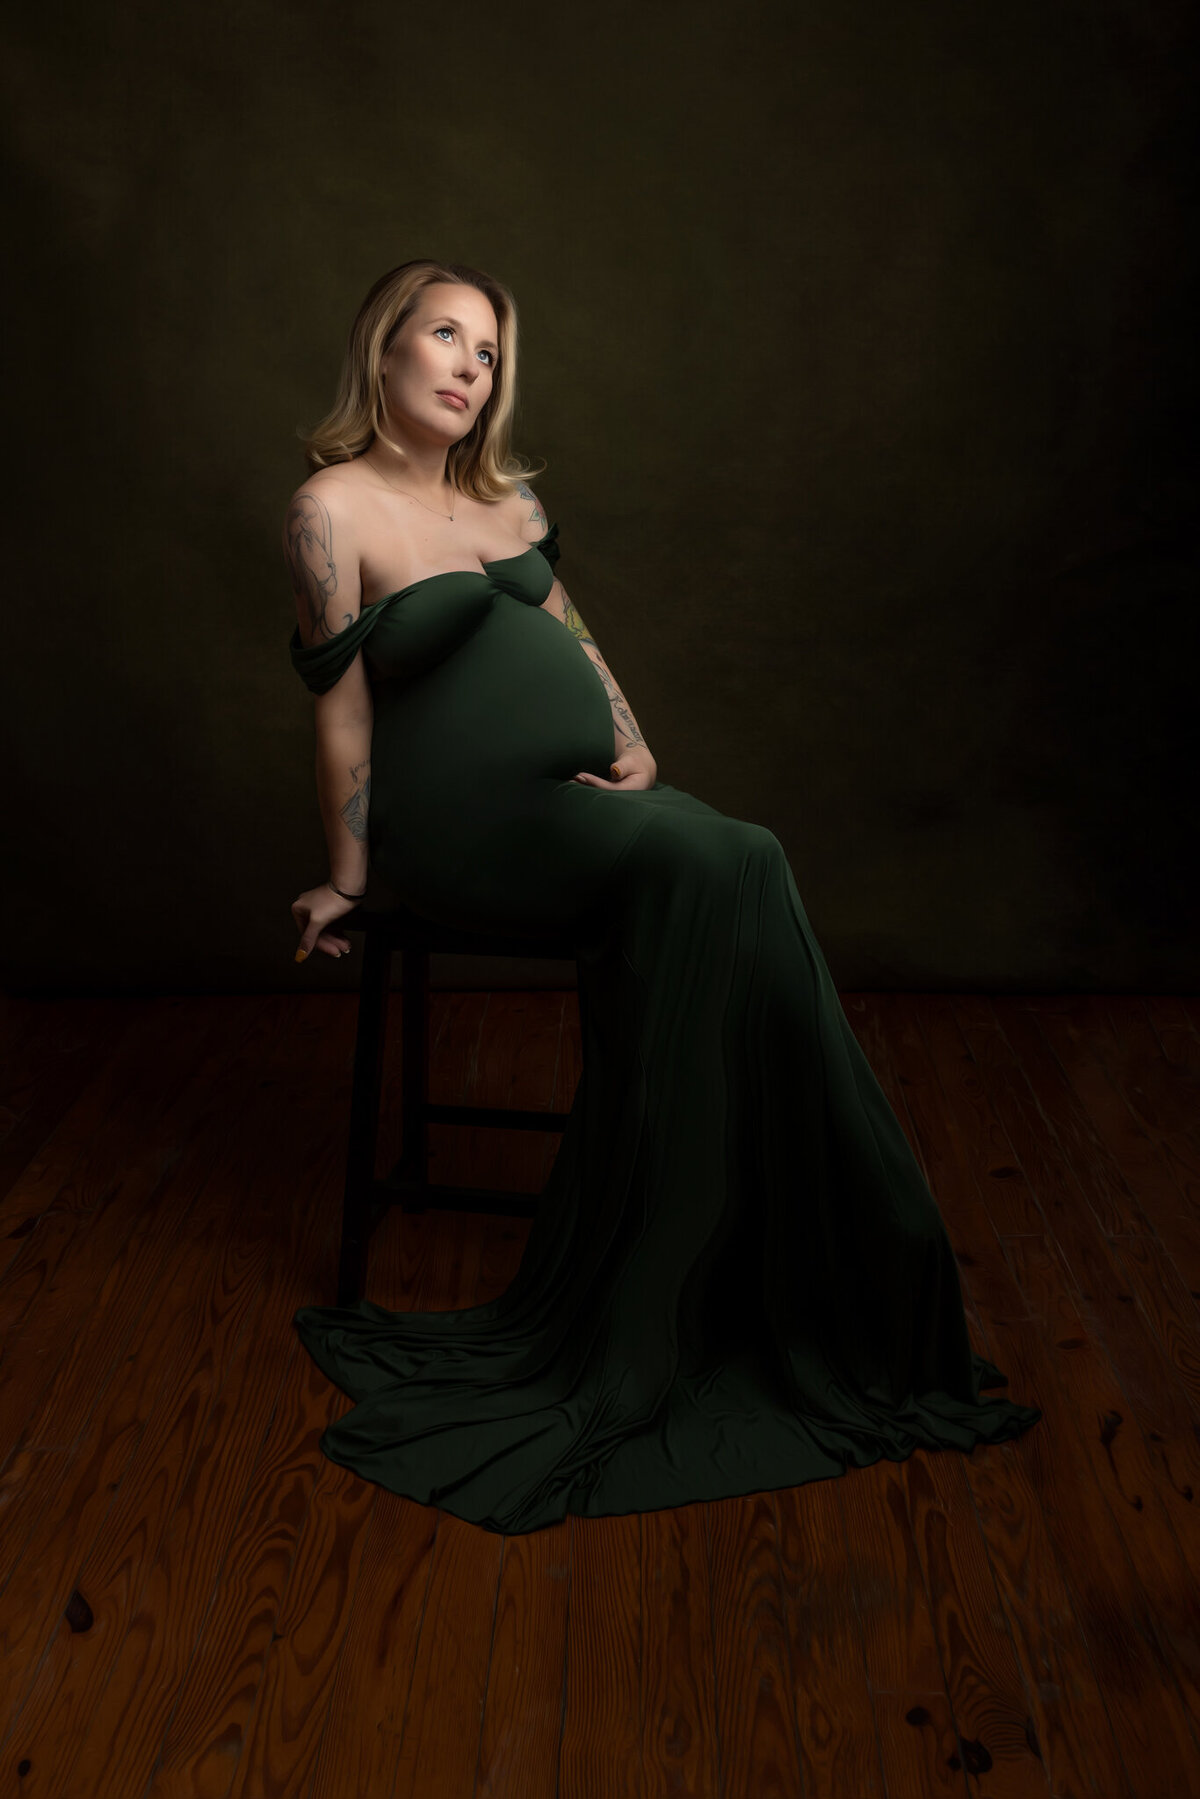 Expectin mother posed on stool in green dress summerville sc maternity